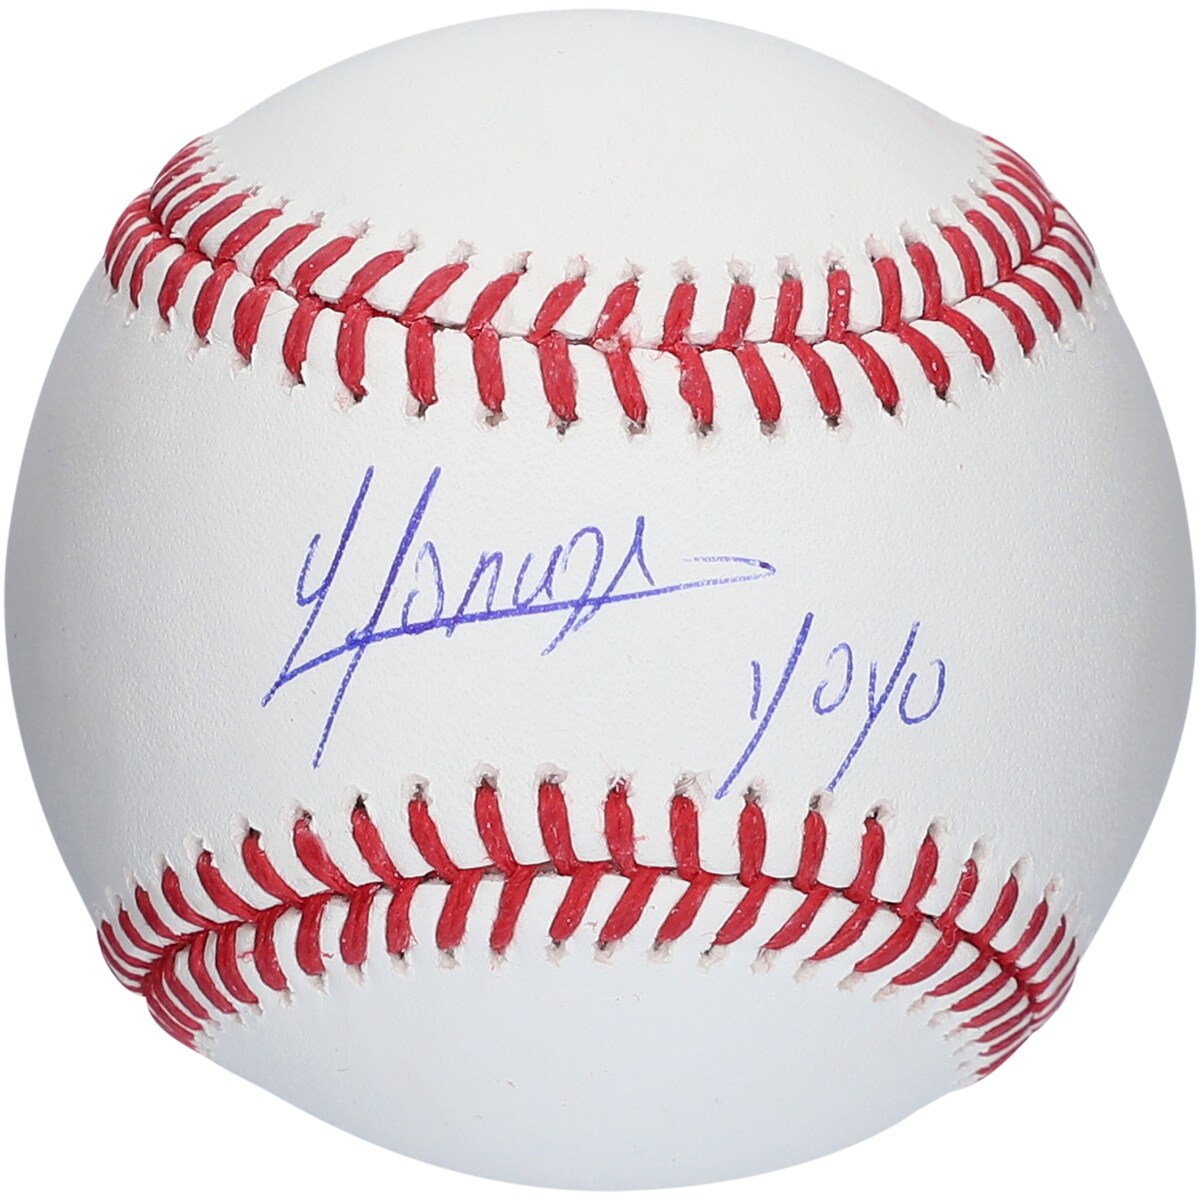 Autographed by Yoan Moncada, this Baseball is ready to boost your Chicago White Sox memorabilia. This baseball is an essential keepsake for any Chicago White Sox fan. It showcases Yoan Moncada's distinct signature on the ball to provide a noteworthy piece to your collection. It also includes the inscription "Yoyo"Hand-signed autographInscription reads ''YOYO''Includes an individually numbered, tamper-evident hologramBrand: Fanatics AuthenticObtained under the auspices of the Major League Baseball Authentication Program and can be verified by its numbered hologram at MLB.comSignature may varyOfficially licensed